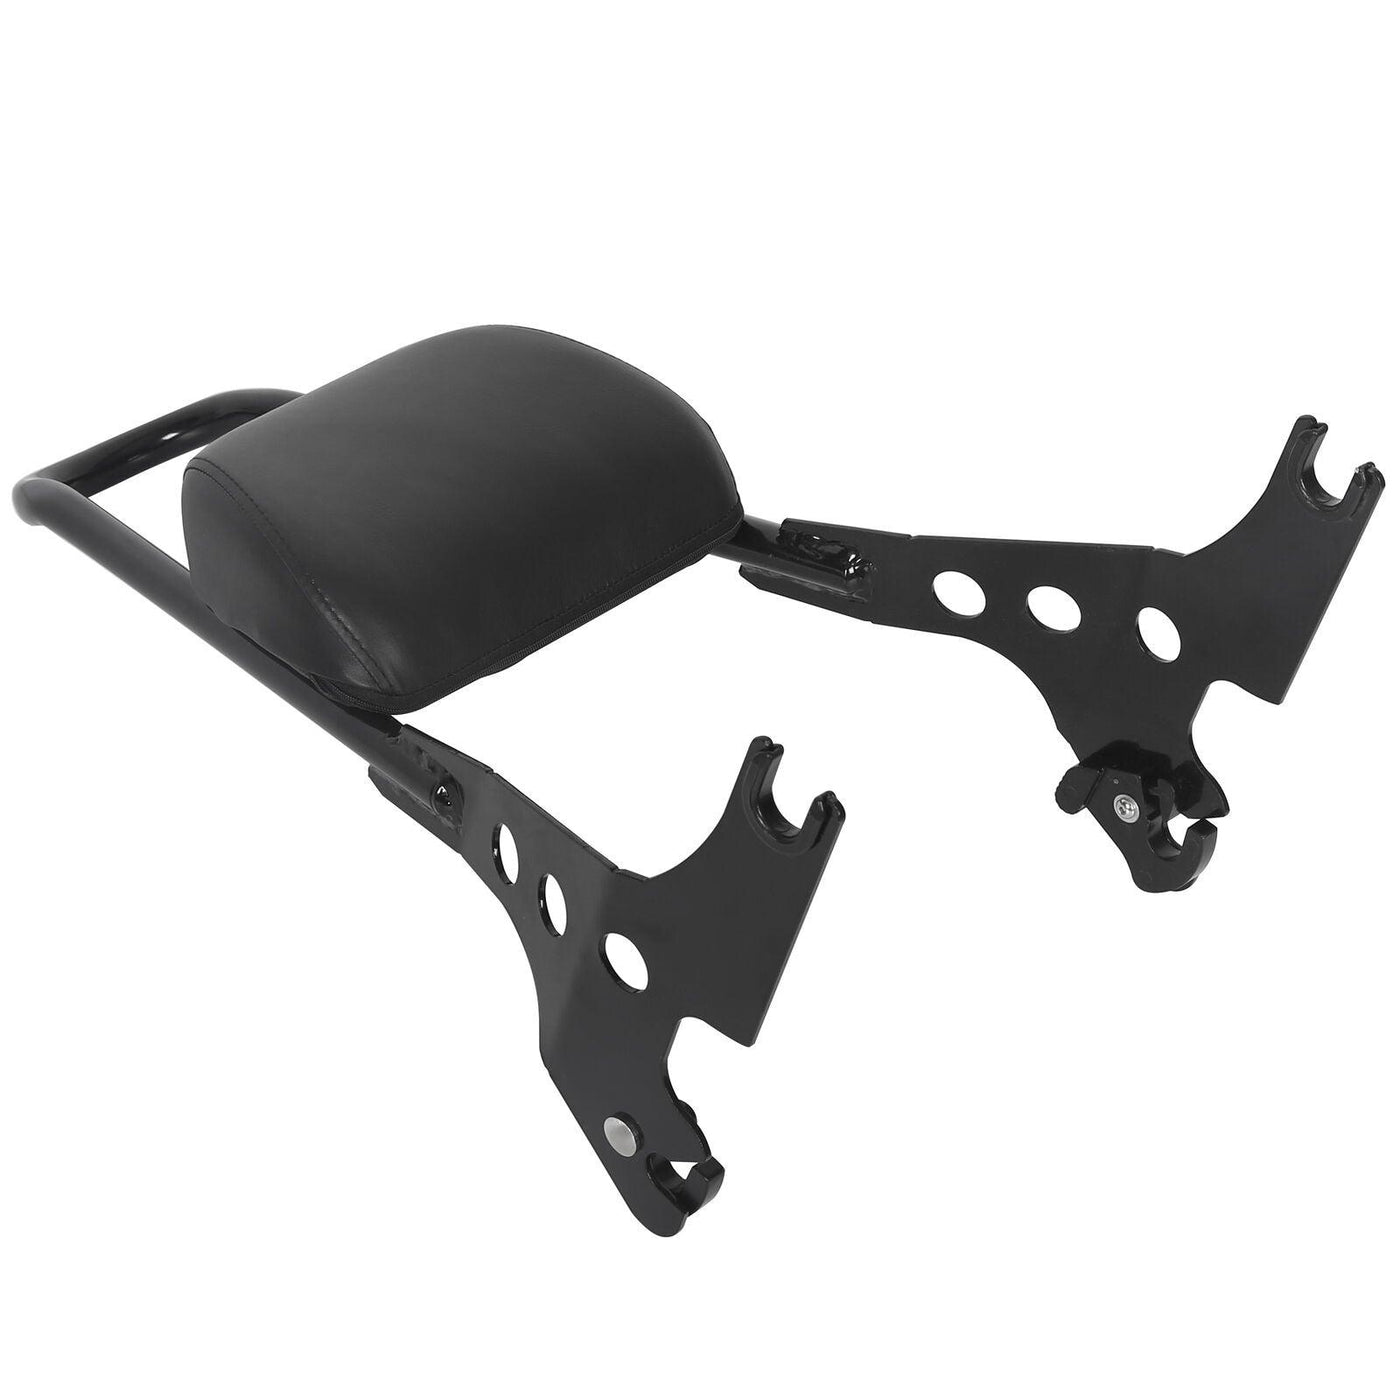 Glossy Black Passenger Backrest Pad Sissy Bar For Harley Sportster XL 883 1200 - Moto Life Products